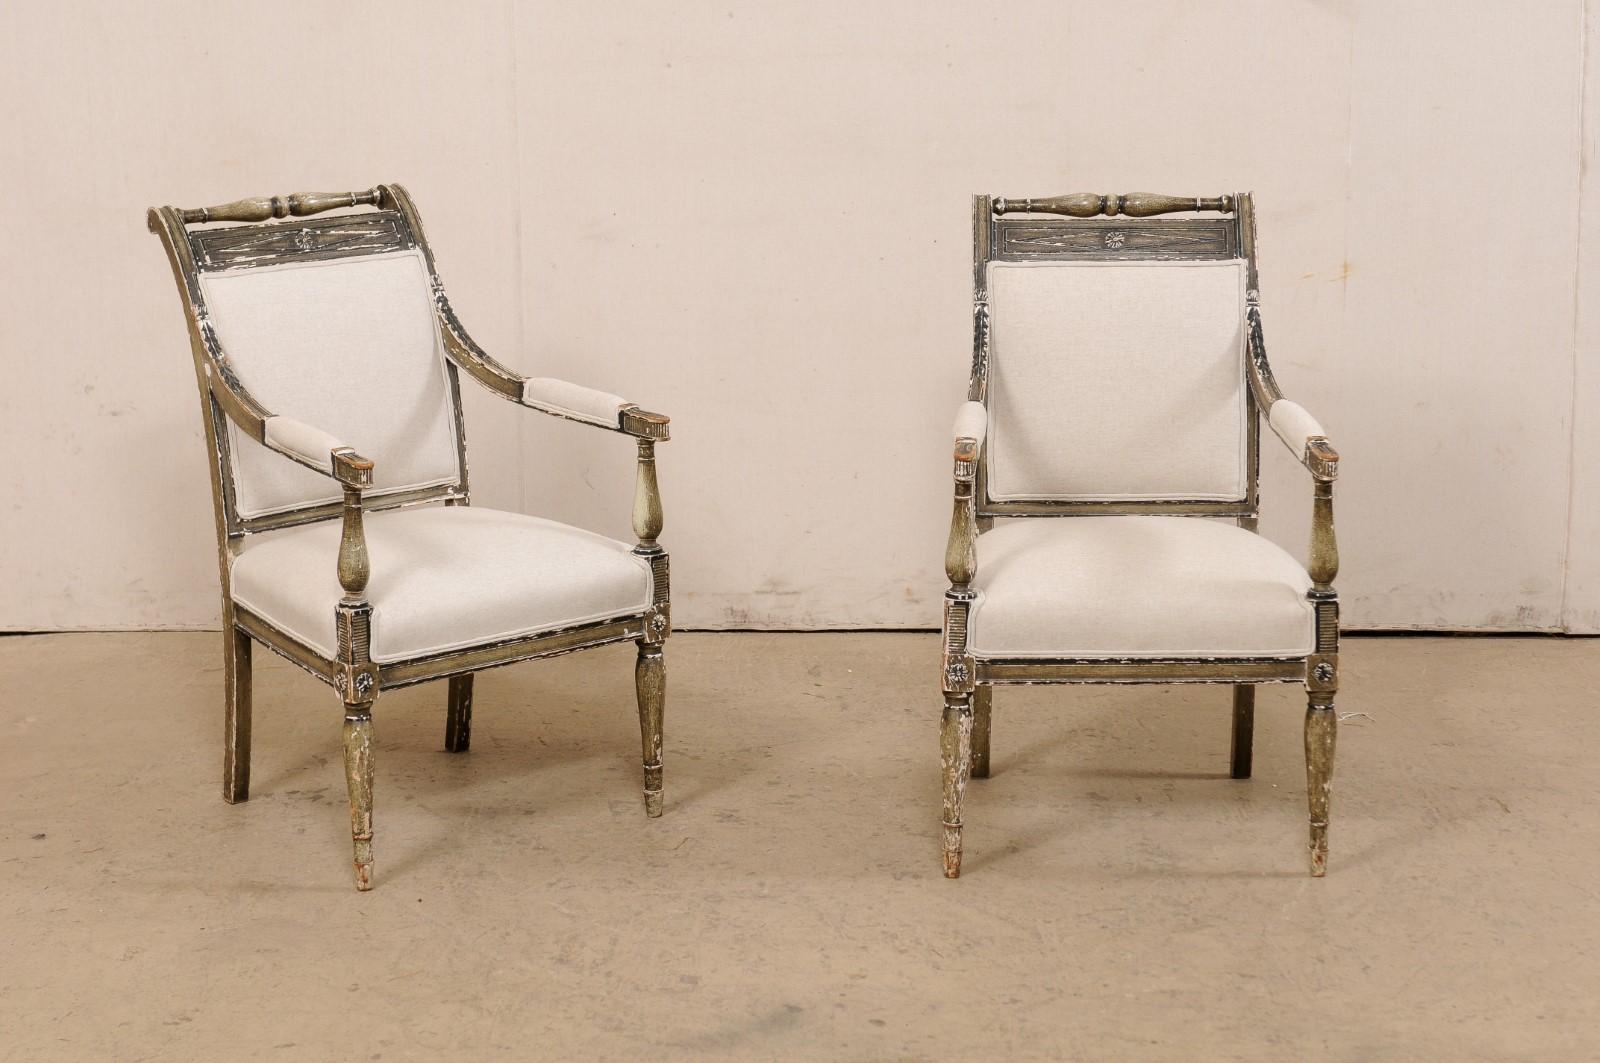 A French pair of Empire style armchairs, with their original painted finish, from the 19th century. These antique fauteuils from France each feature beautifully arched backs, rectangular in shape with upholstered back-centers framed within wood